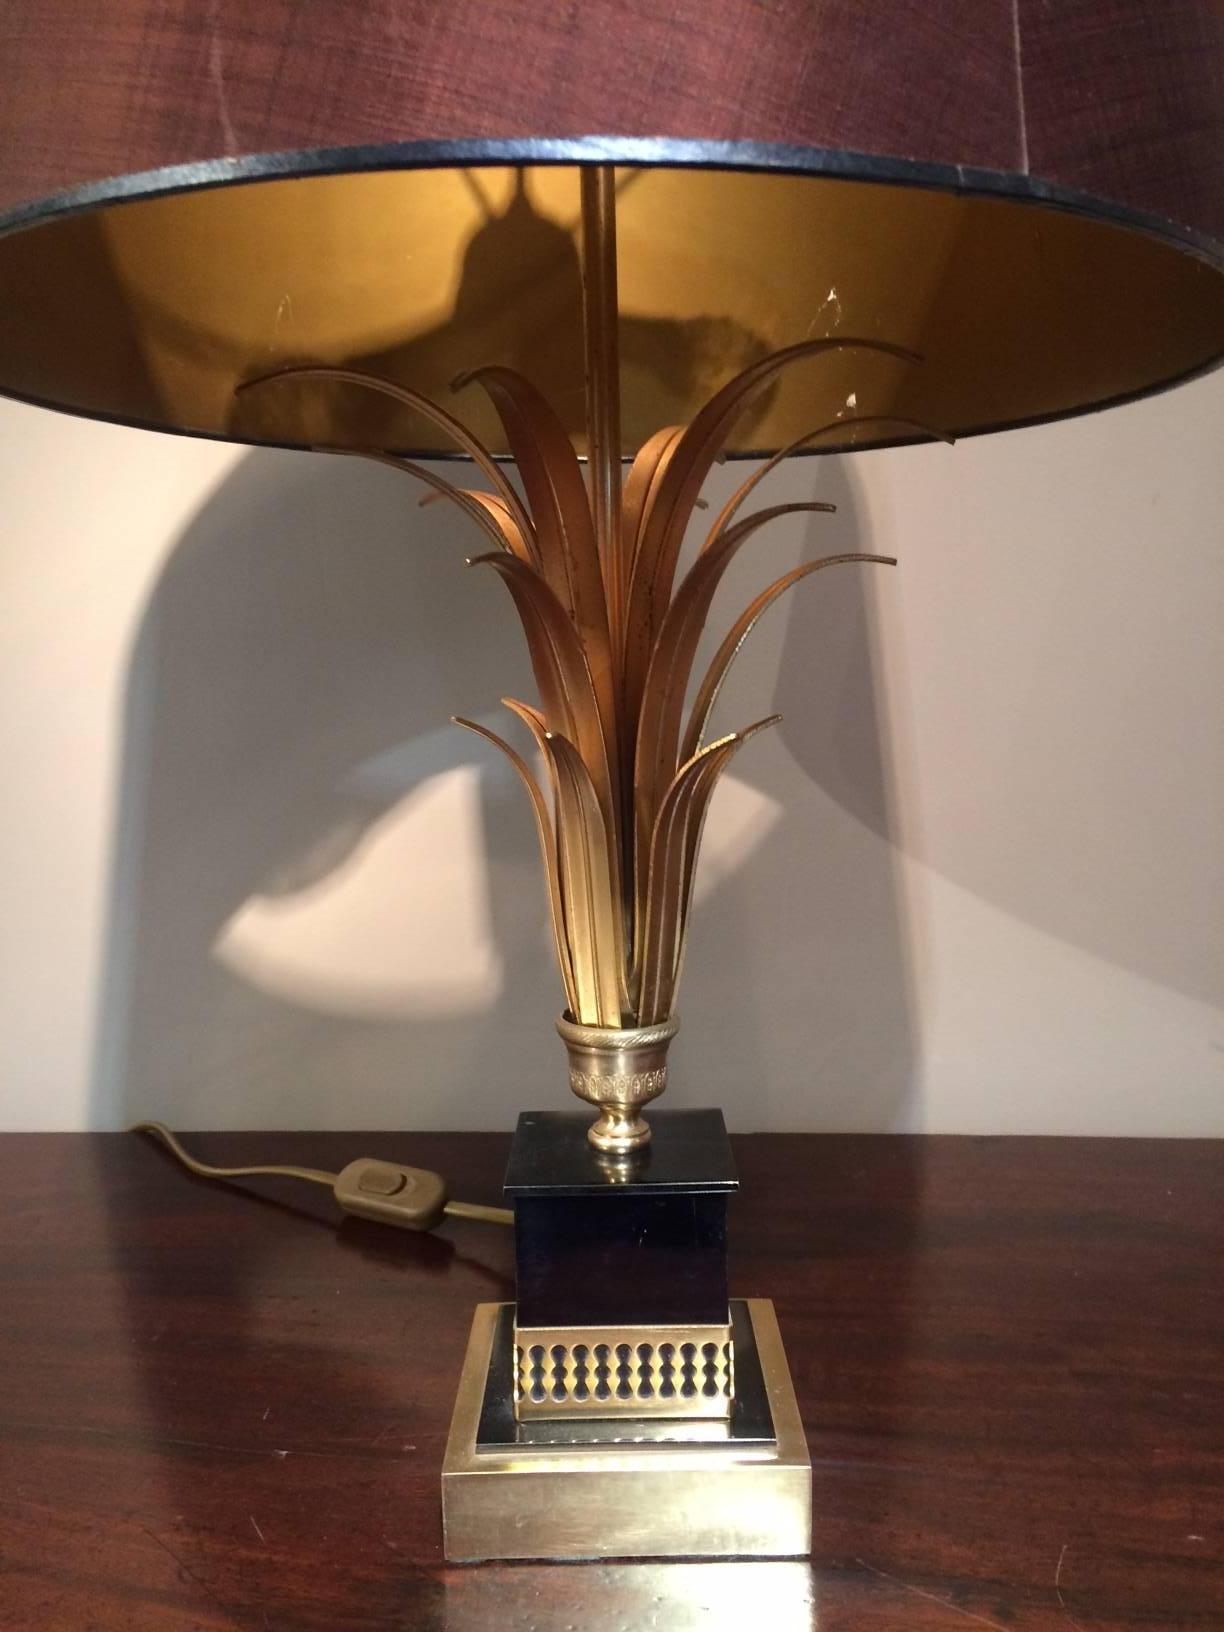 A exquisite gold pineapple lamp with black base. In the style of the designer Maison Charles. Lovely detail on the pineapple leaves. Three bulb fixture which allows for brilliant light.

Burgundy lampshade included in the price.

Wired and ready